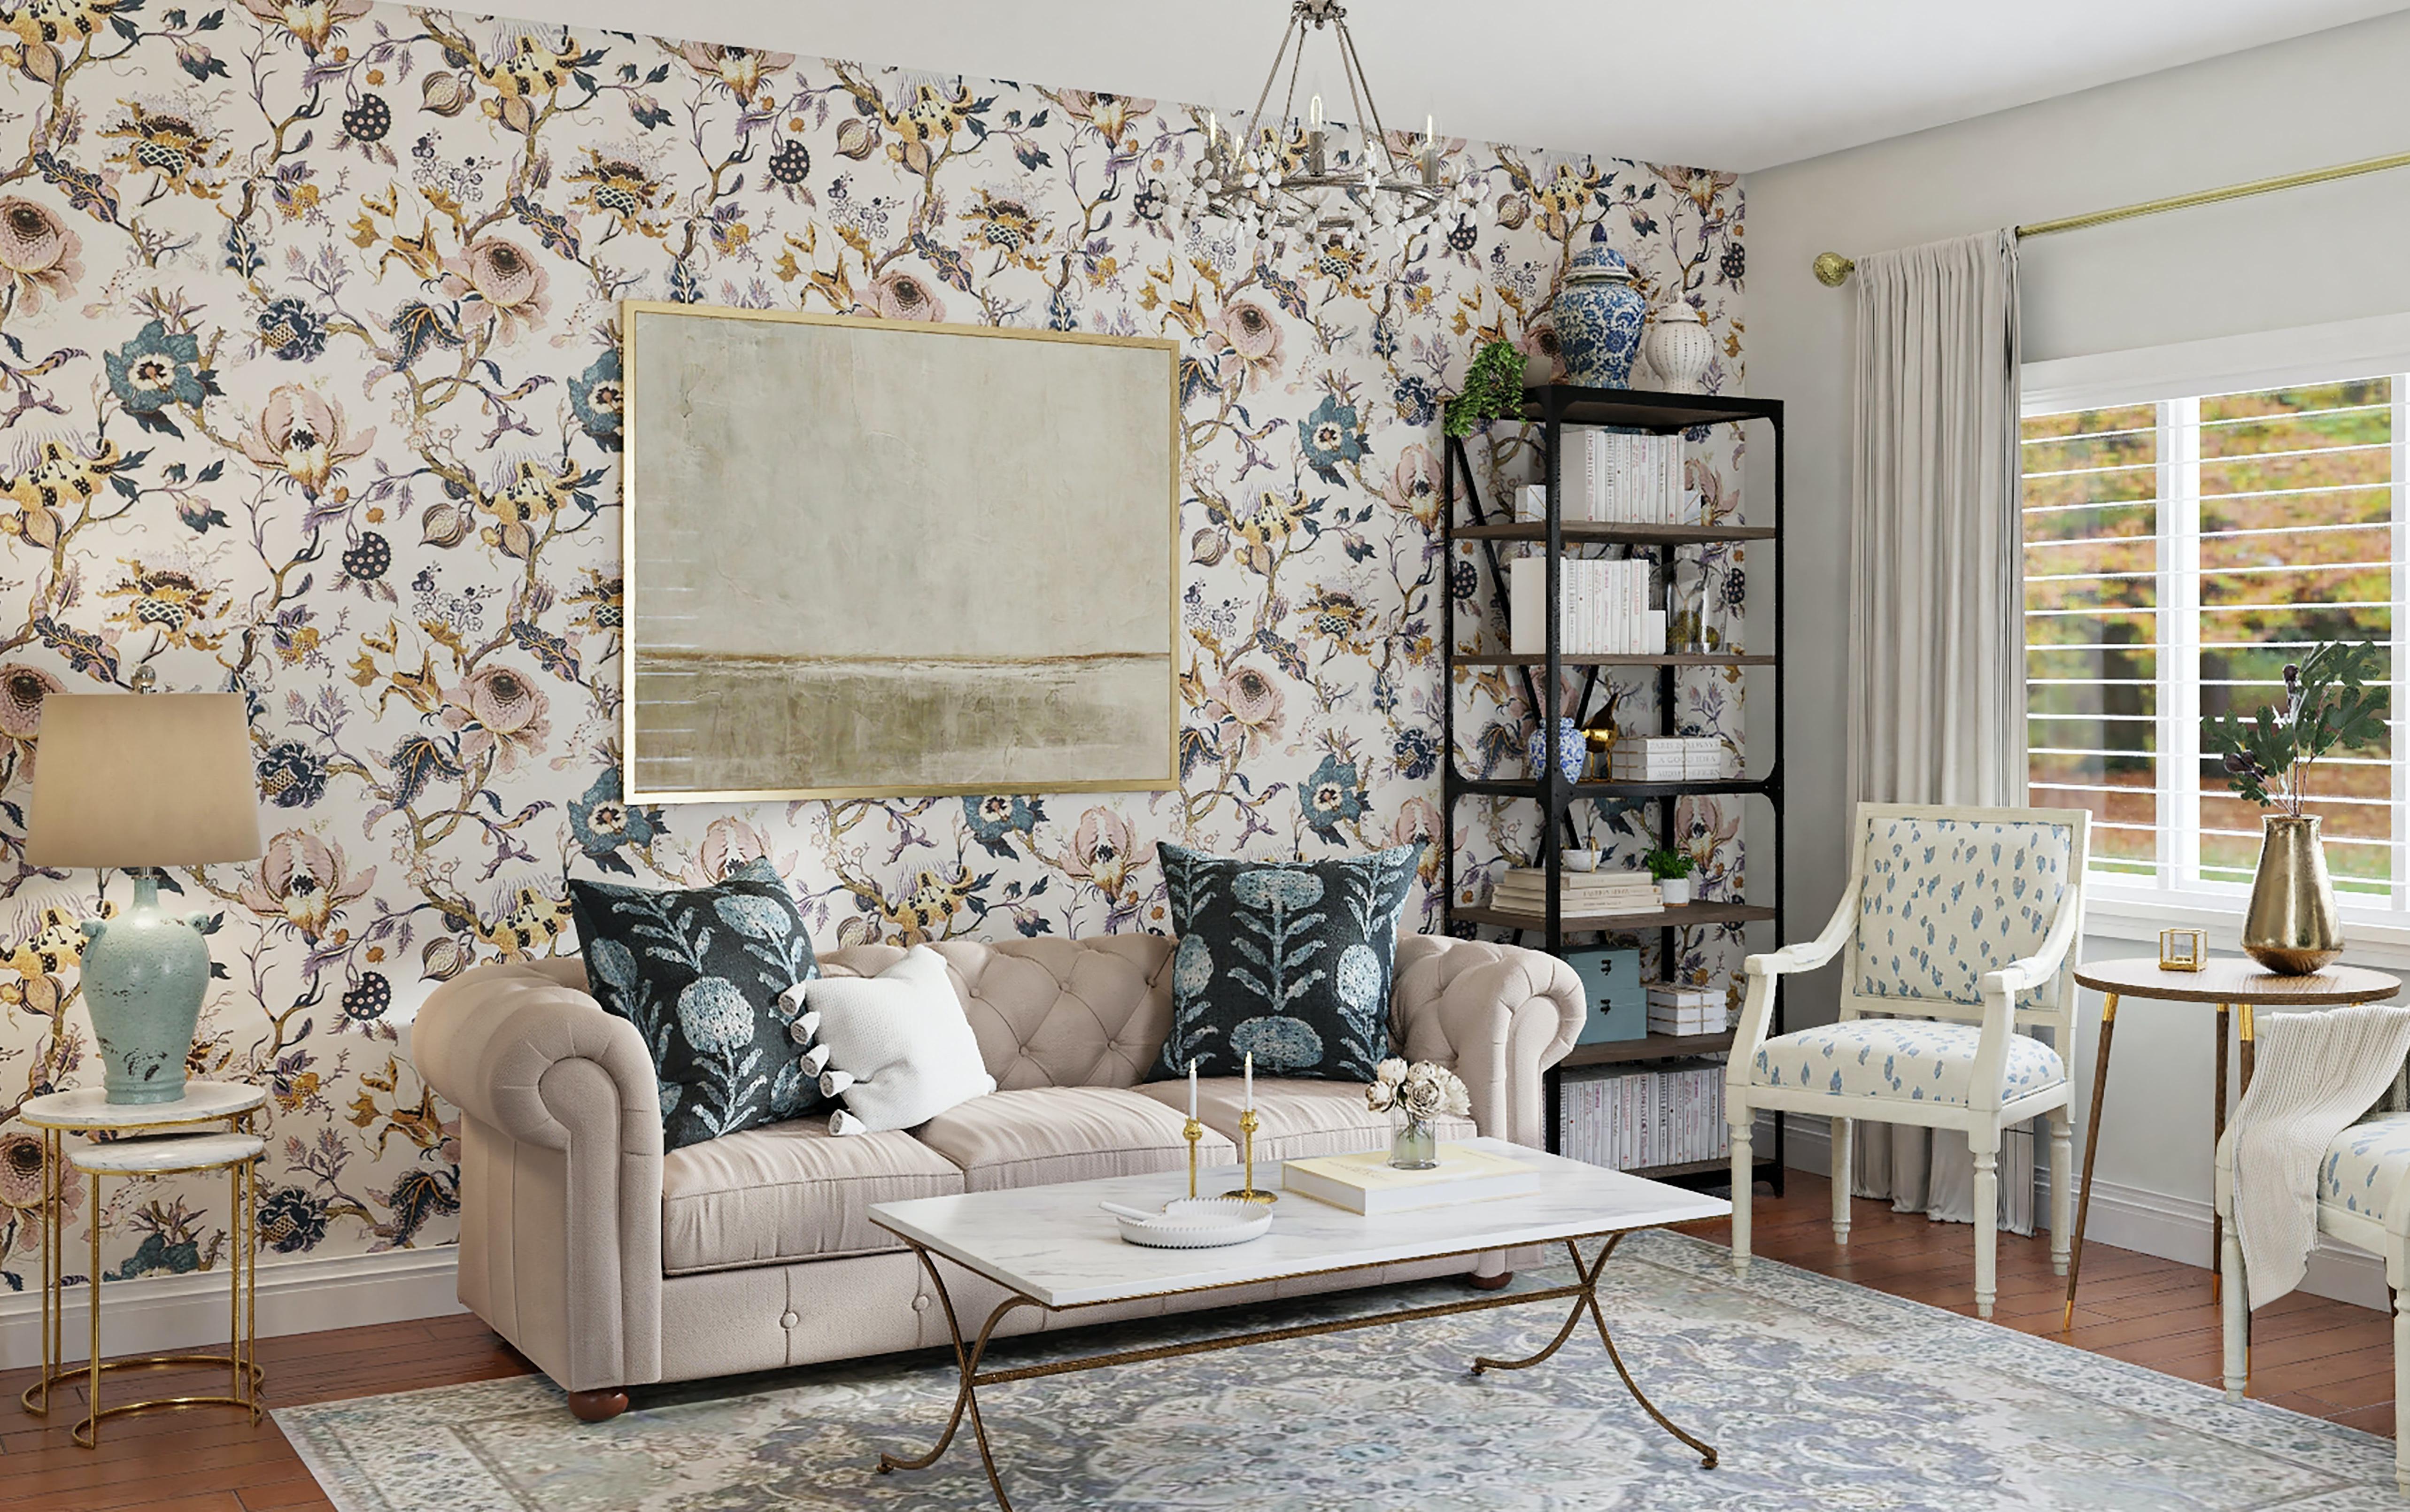 10 Stand-Out Wallpaper Trends to Look Out for in 2023